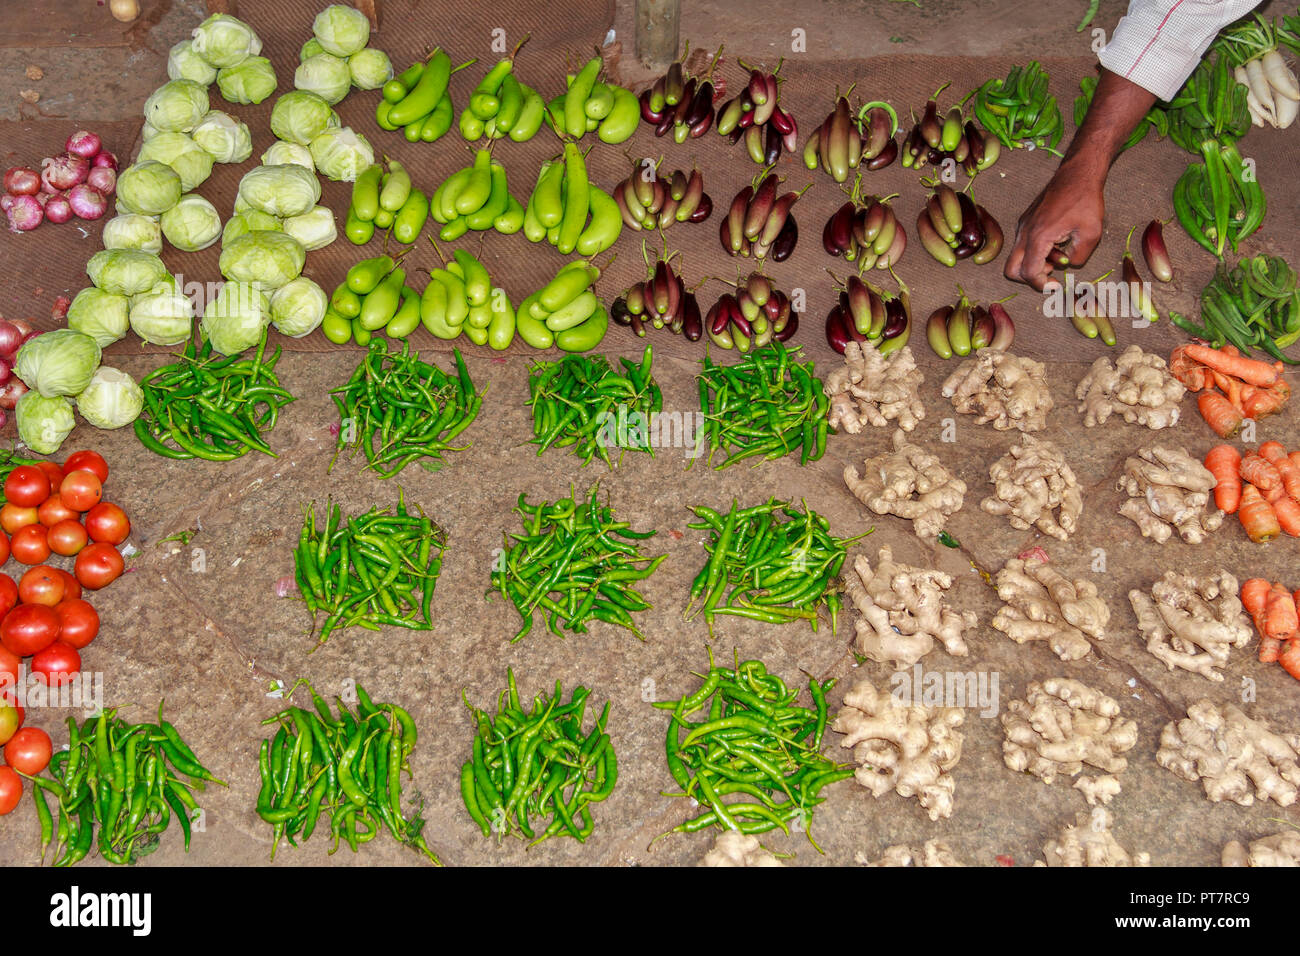 STREET STALL A PLENTIFUL SELECTION OF VEGETABLES SET OUT IN ROWS INDIA Stock Photo